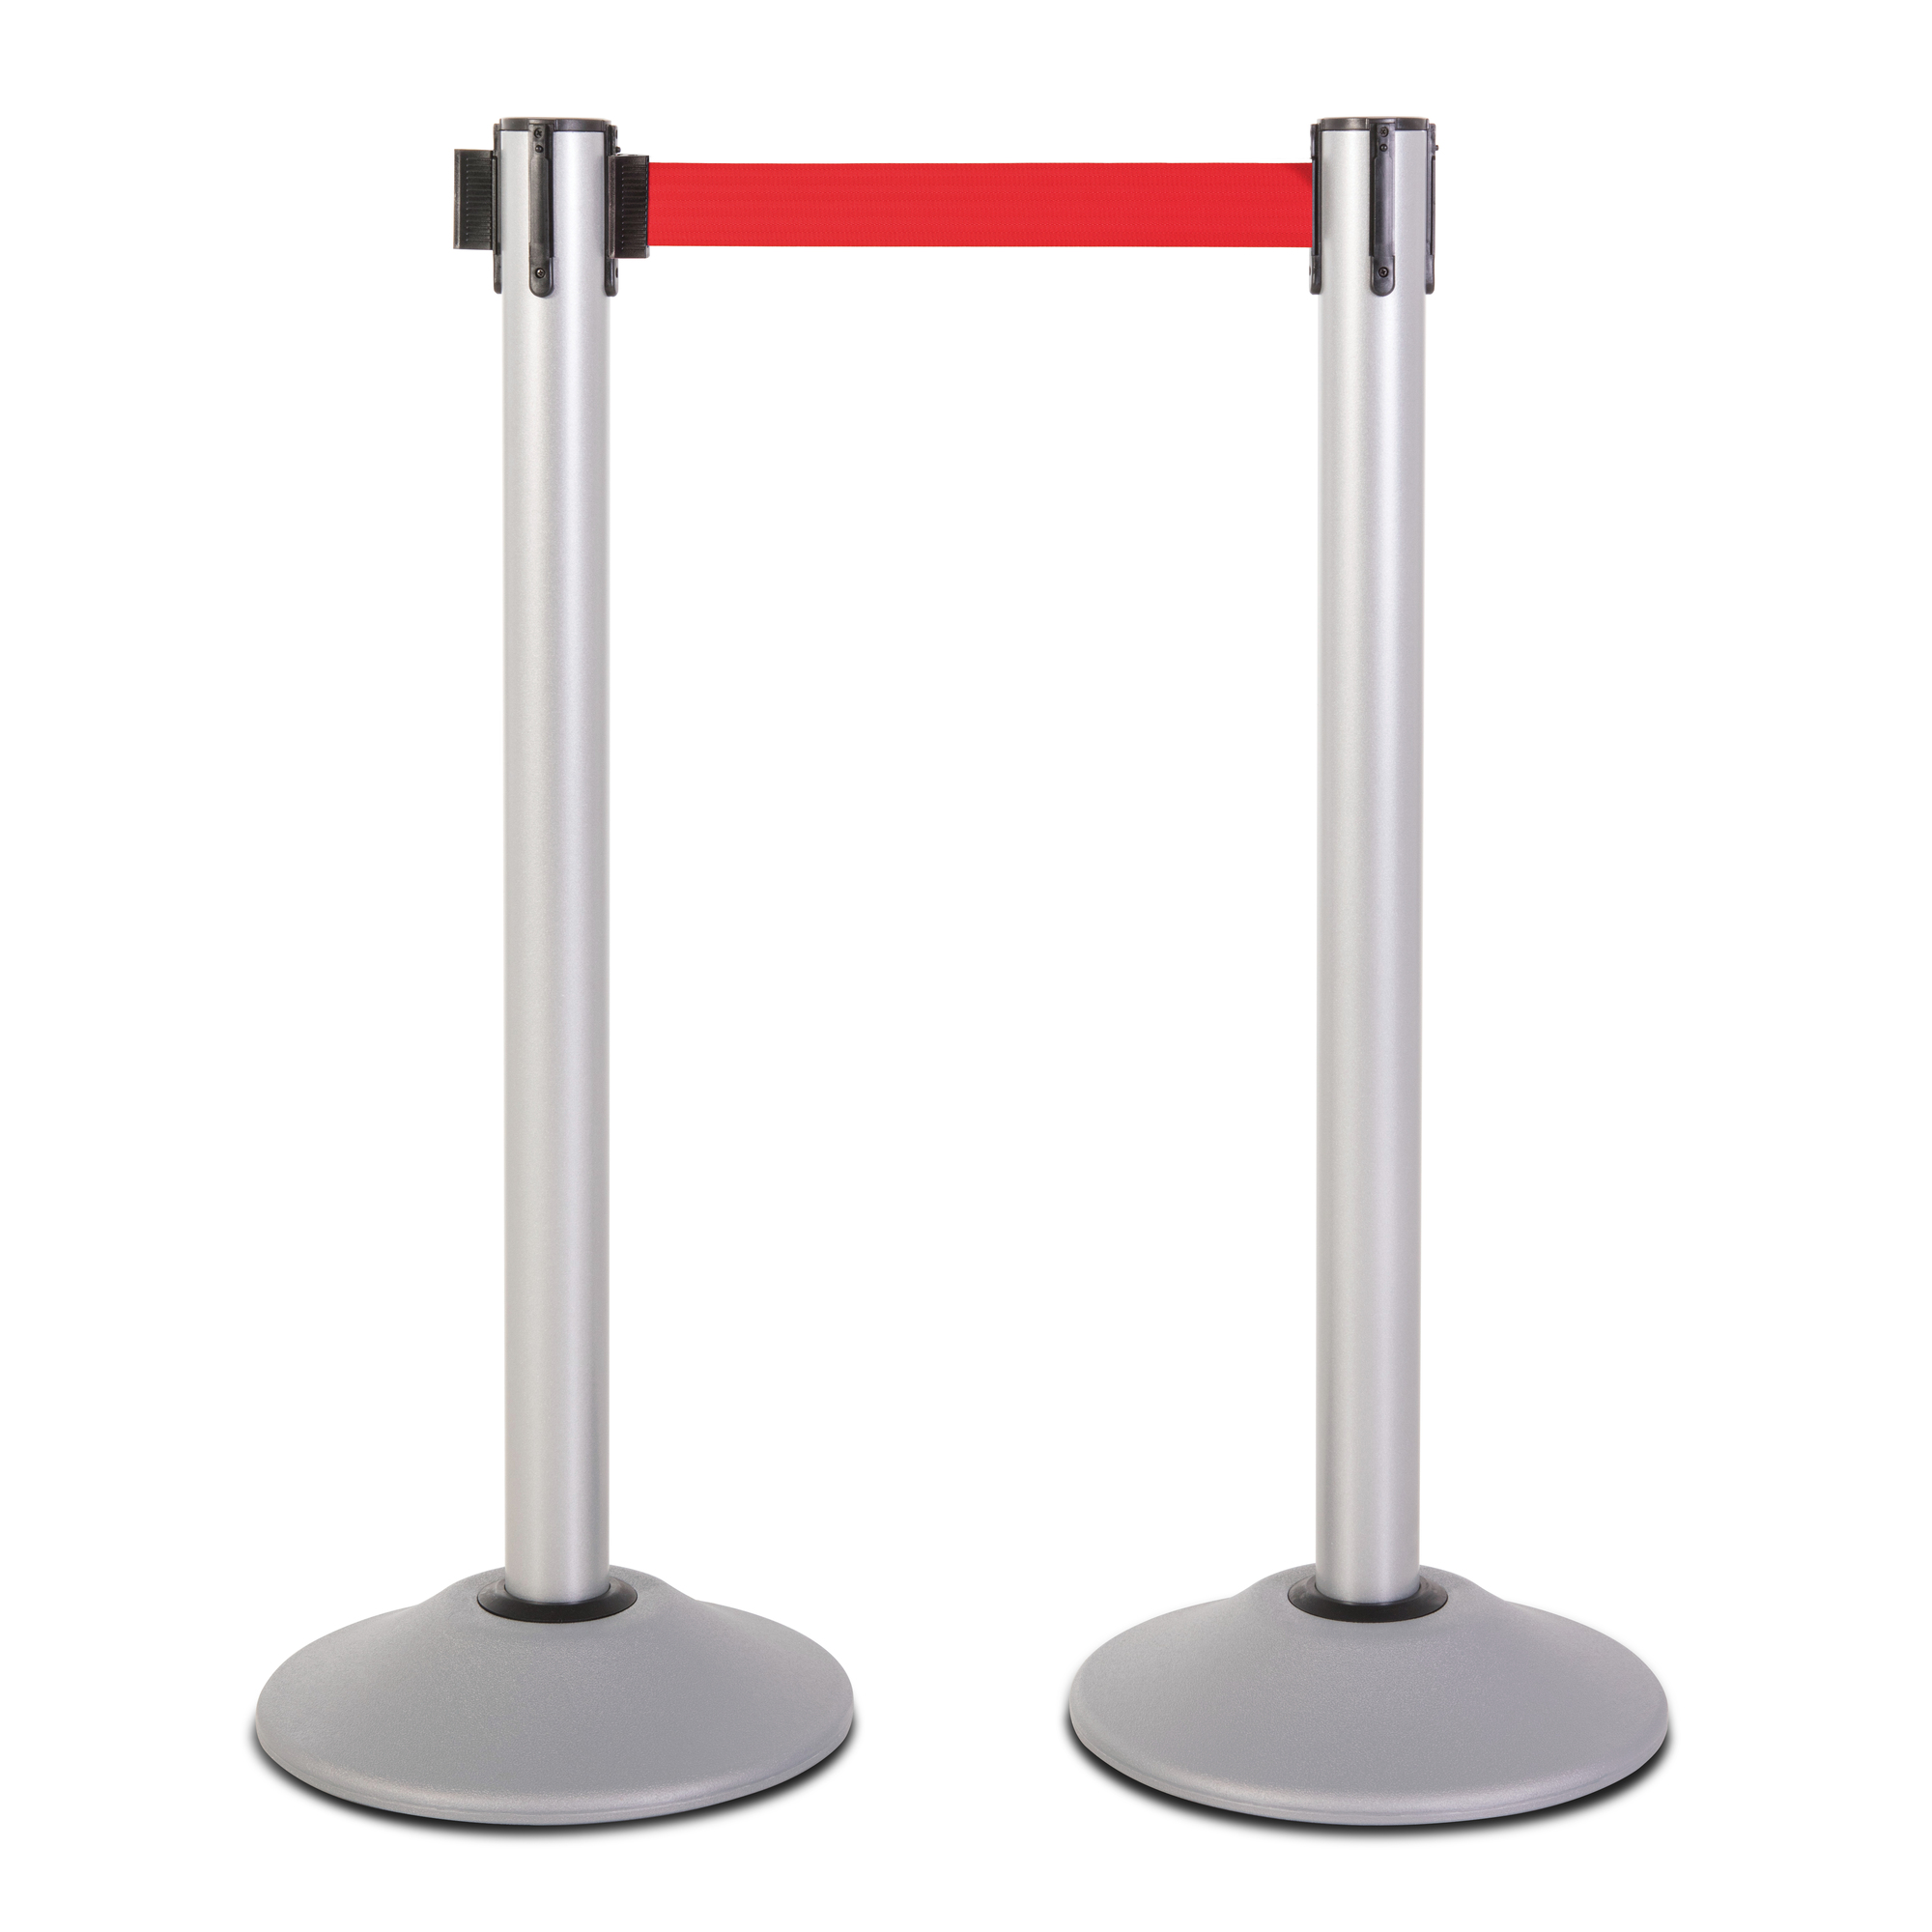 US Weight, Silver post and 7.5ft. Red Belt - 2 pack, Model U2103RED